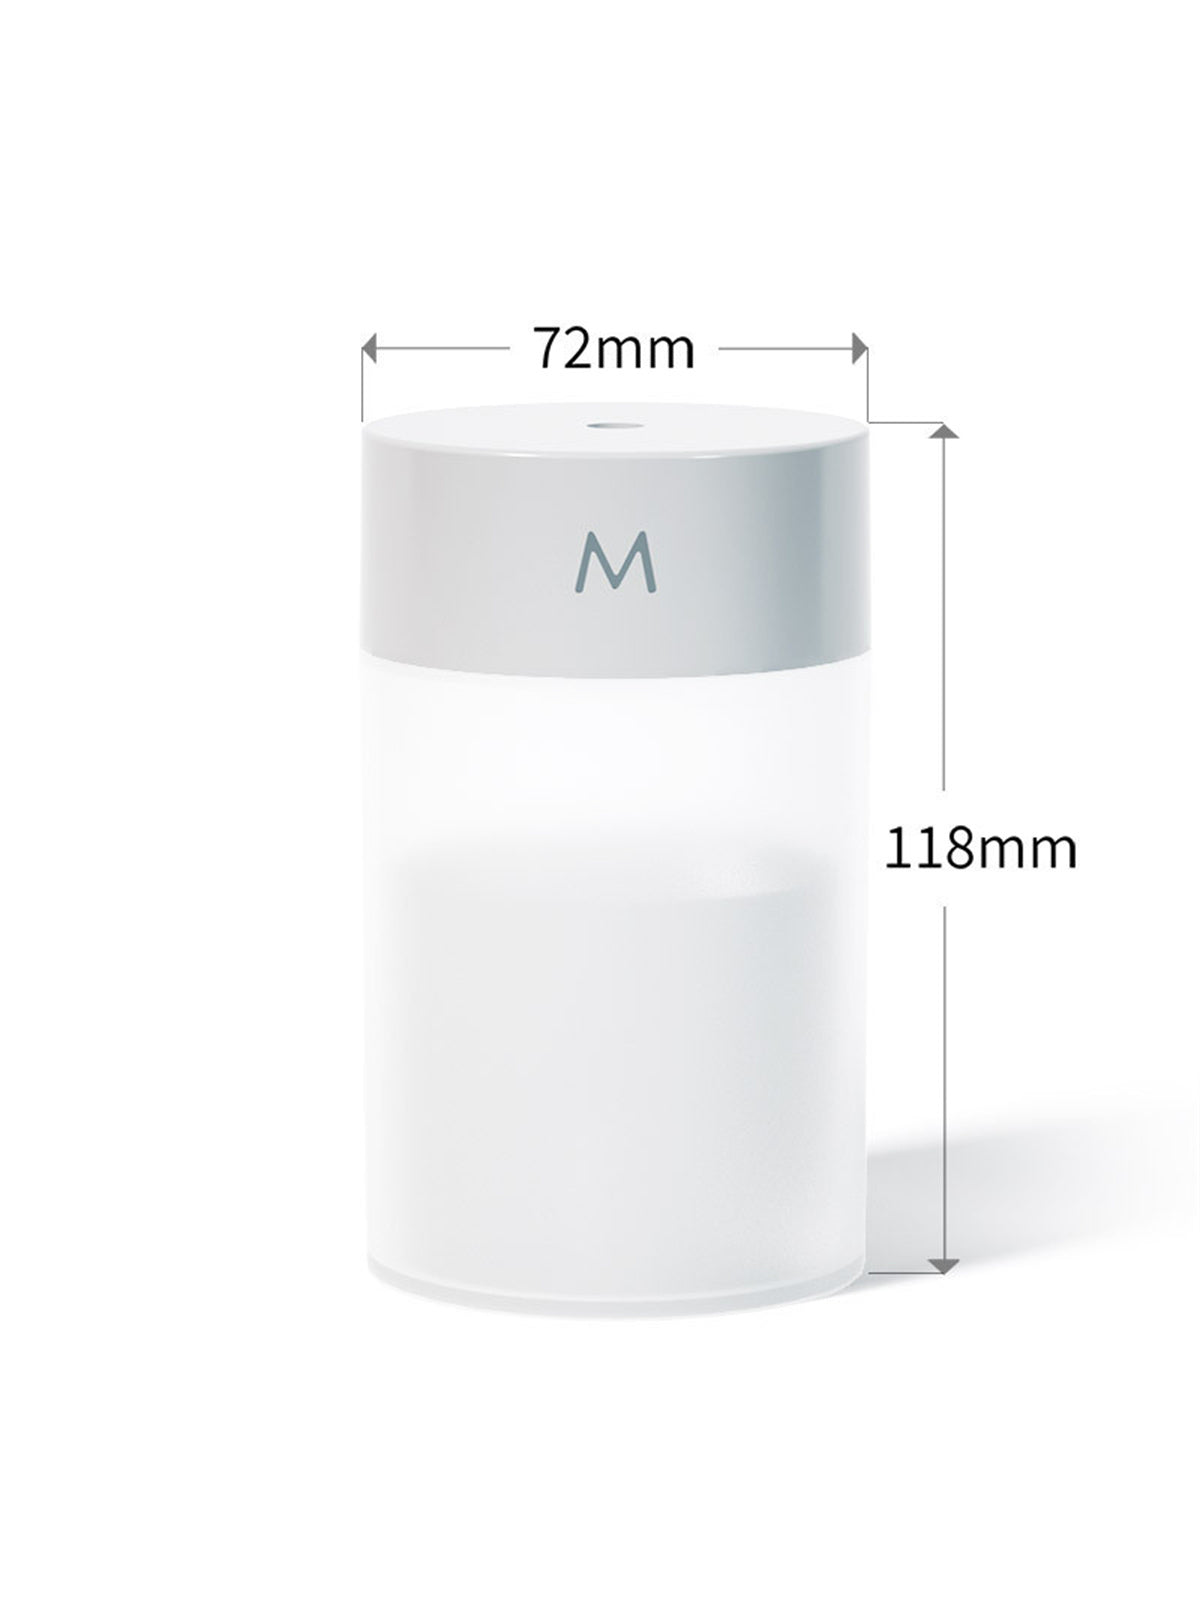 1pc Plastic Humidifier, Modern Solid Color Letter Graphic Cylinder Design Desktop Atomizer Hydrating Device For Home